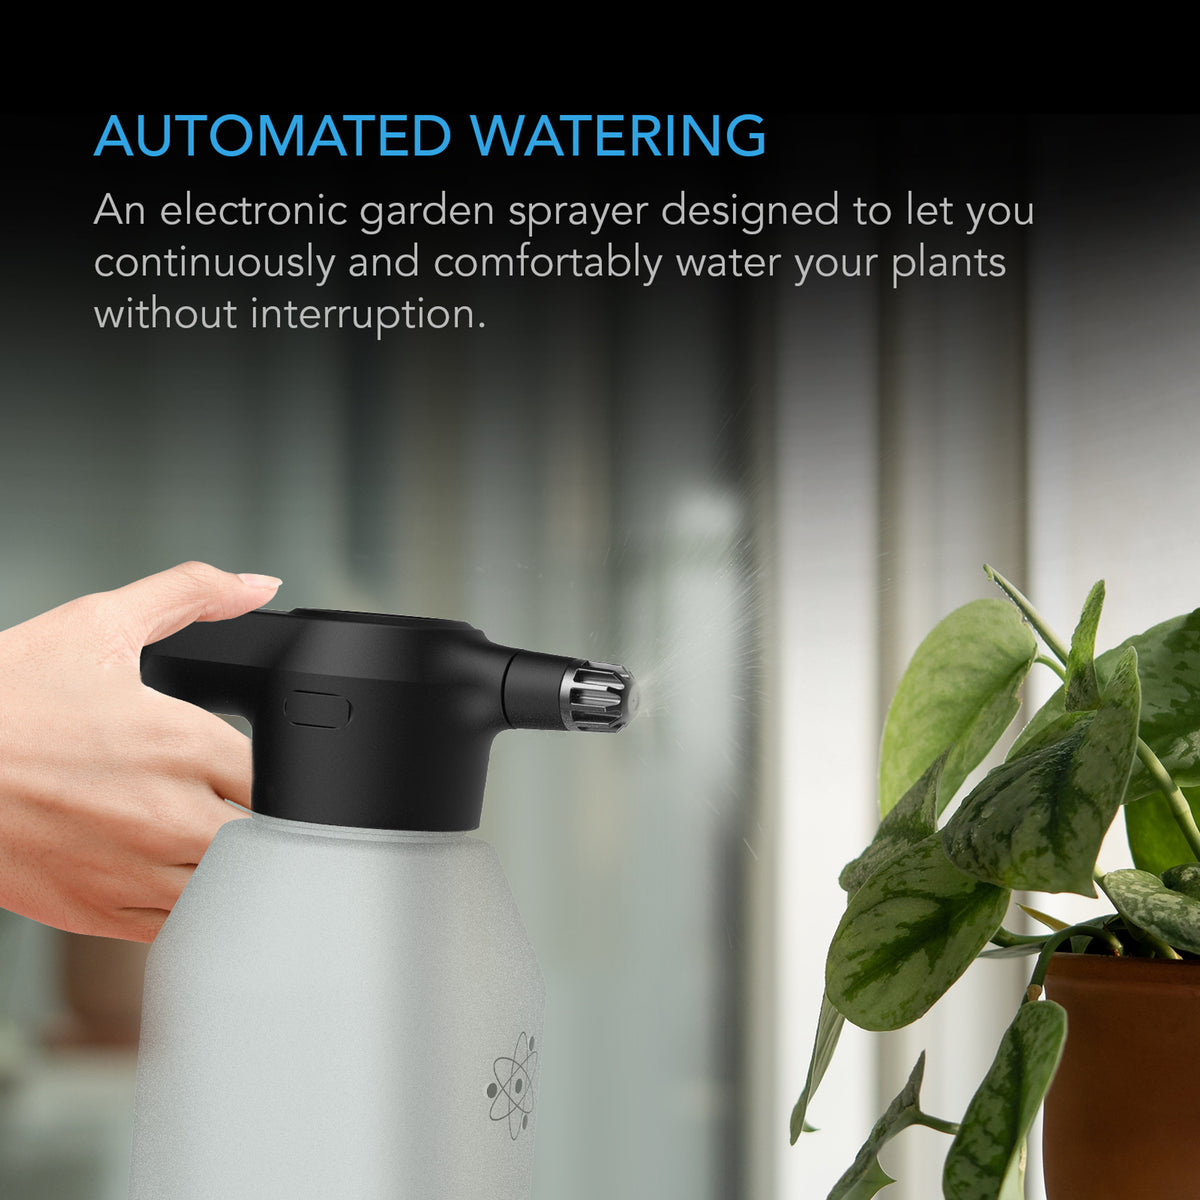 Automated Watering mister